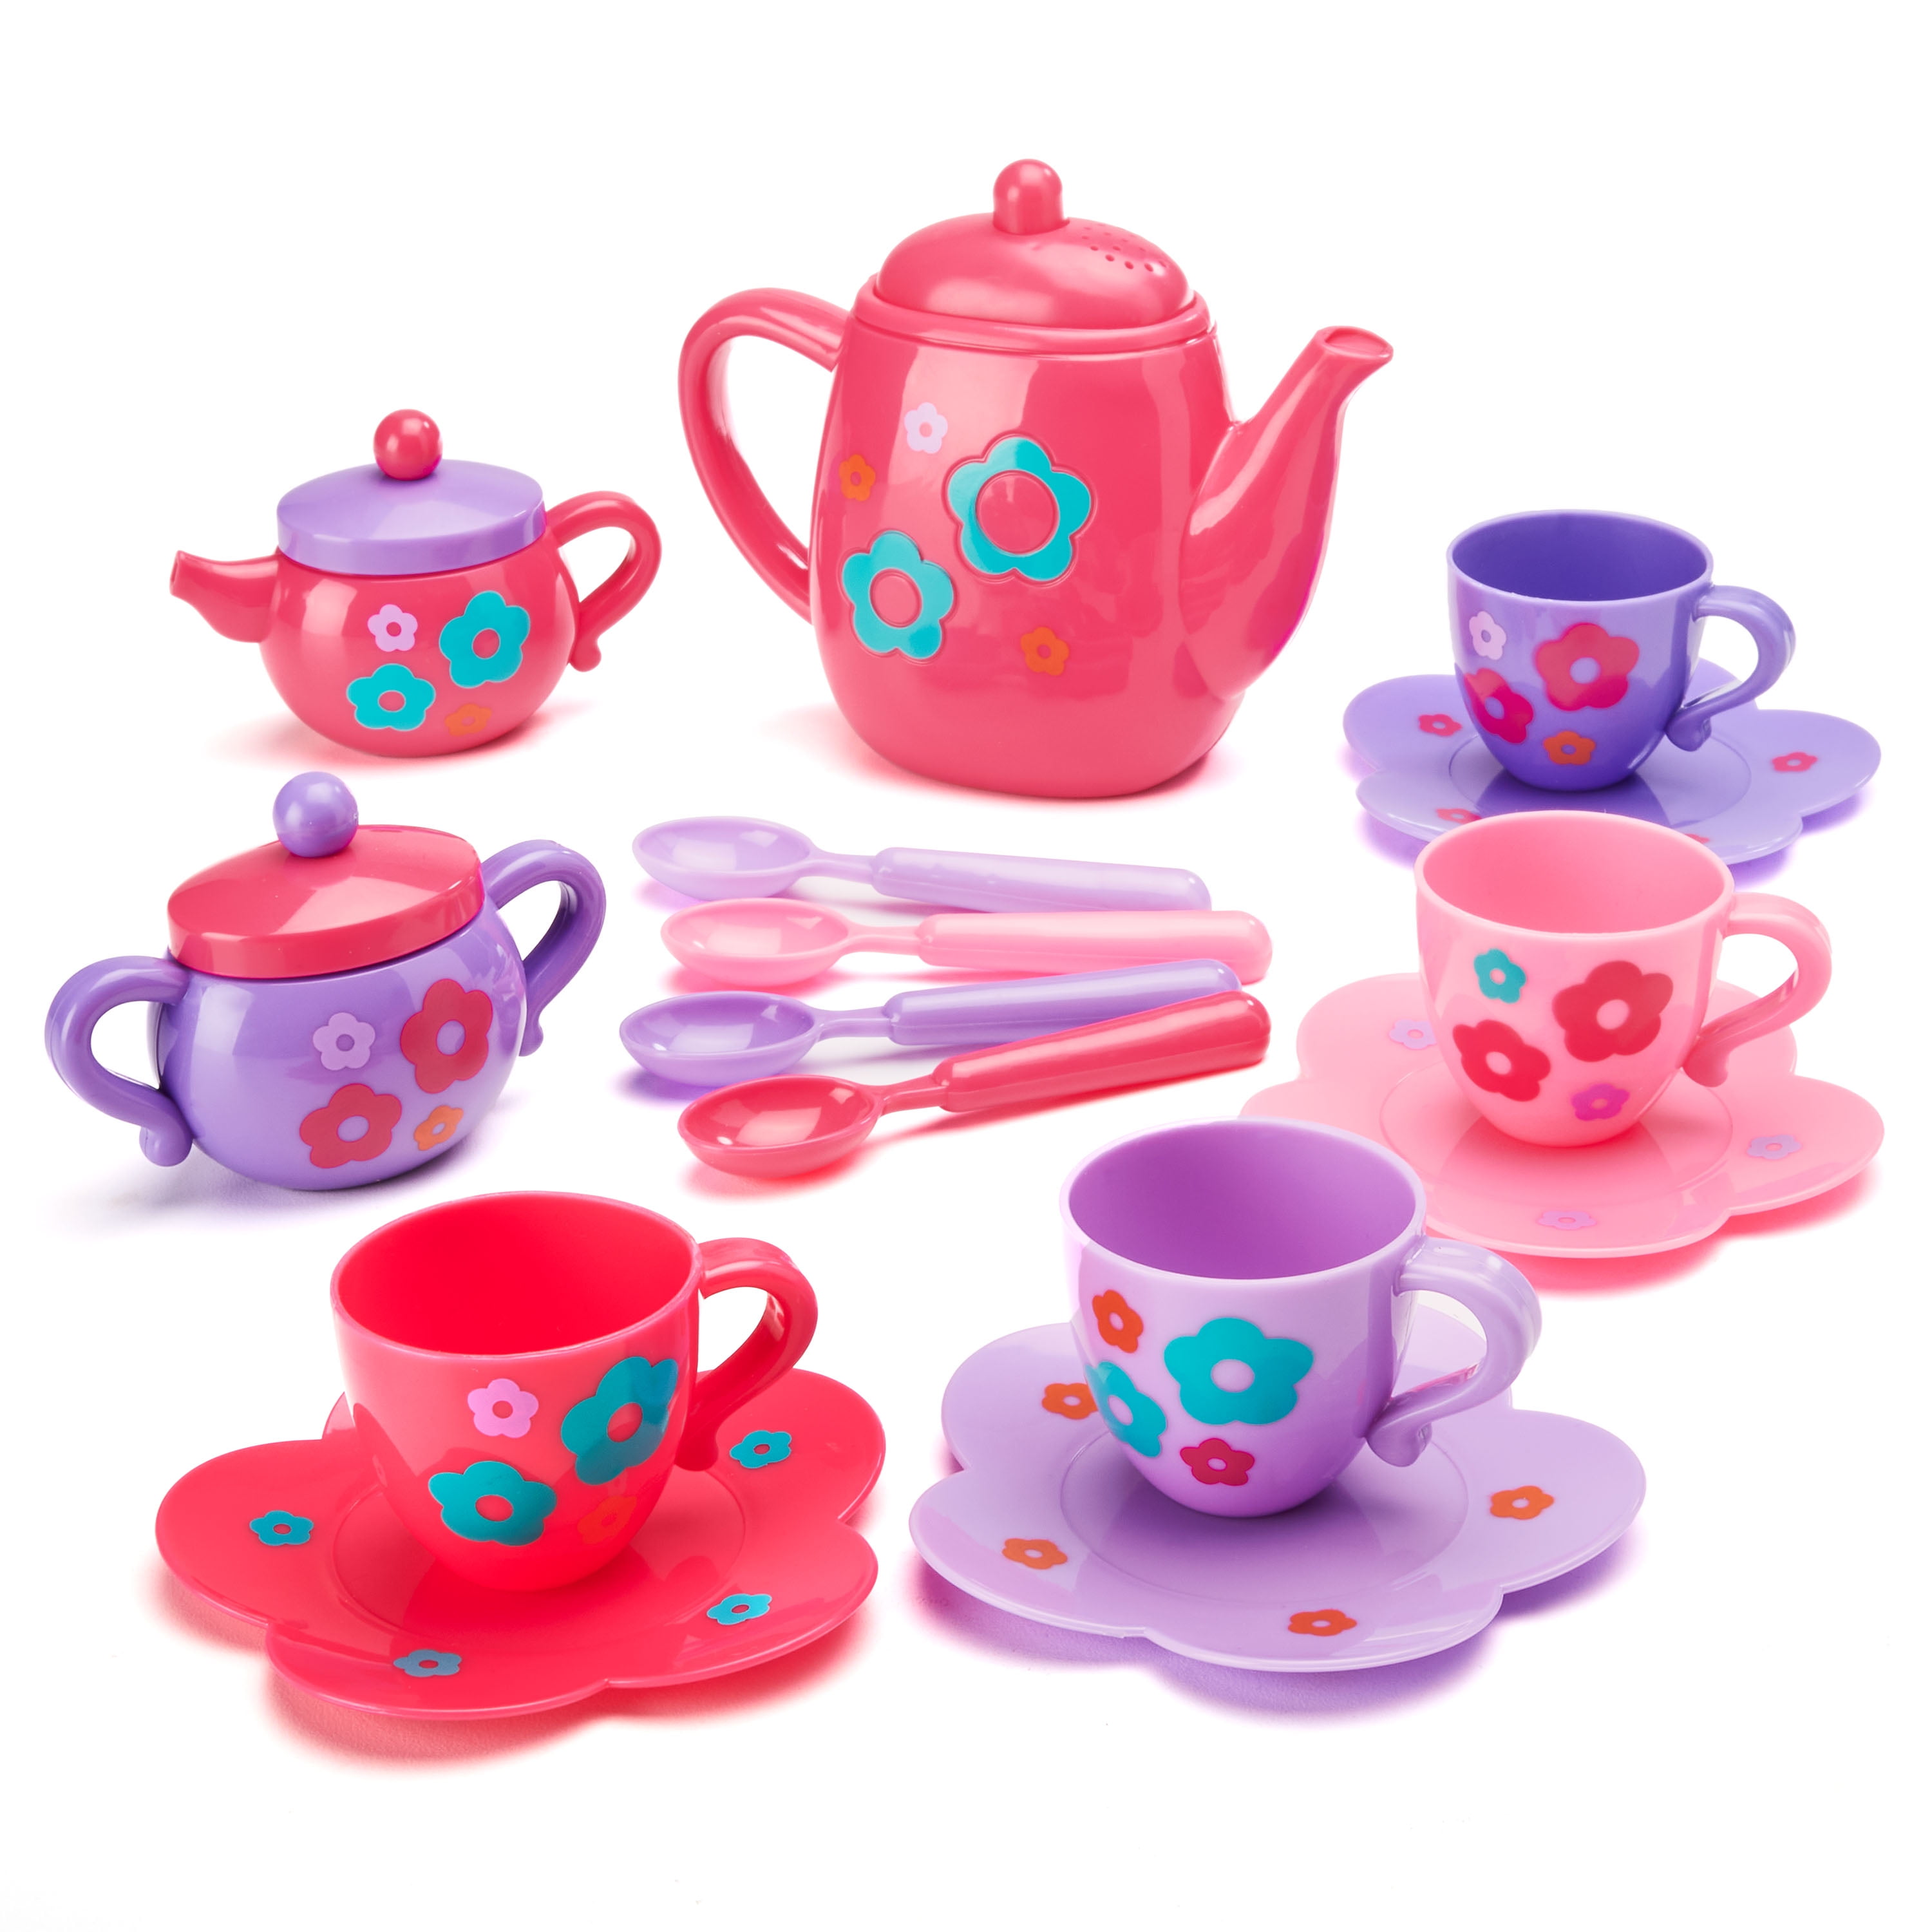 18Pcs Plastic Tea Set Pretend Play Toy Educational Toy for Kids Toddler Gift 